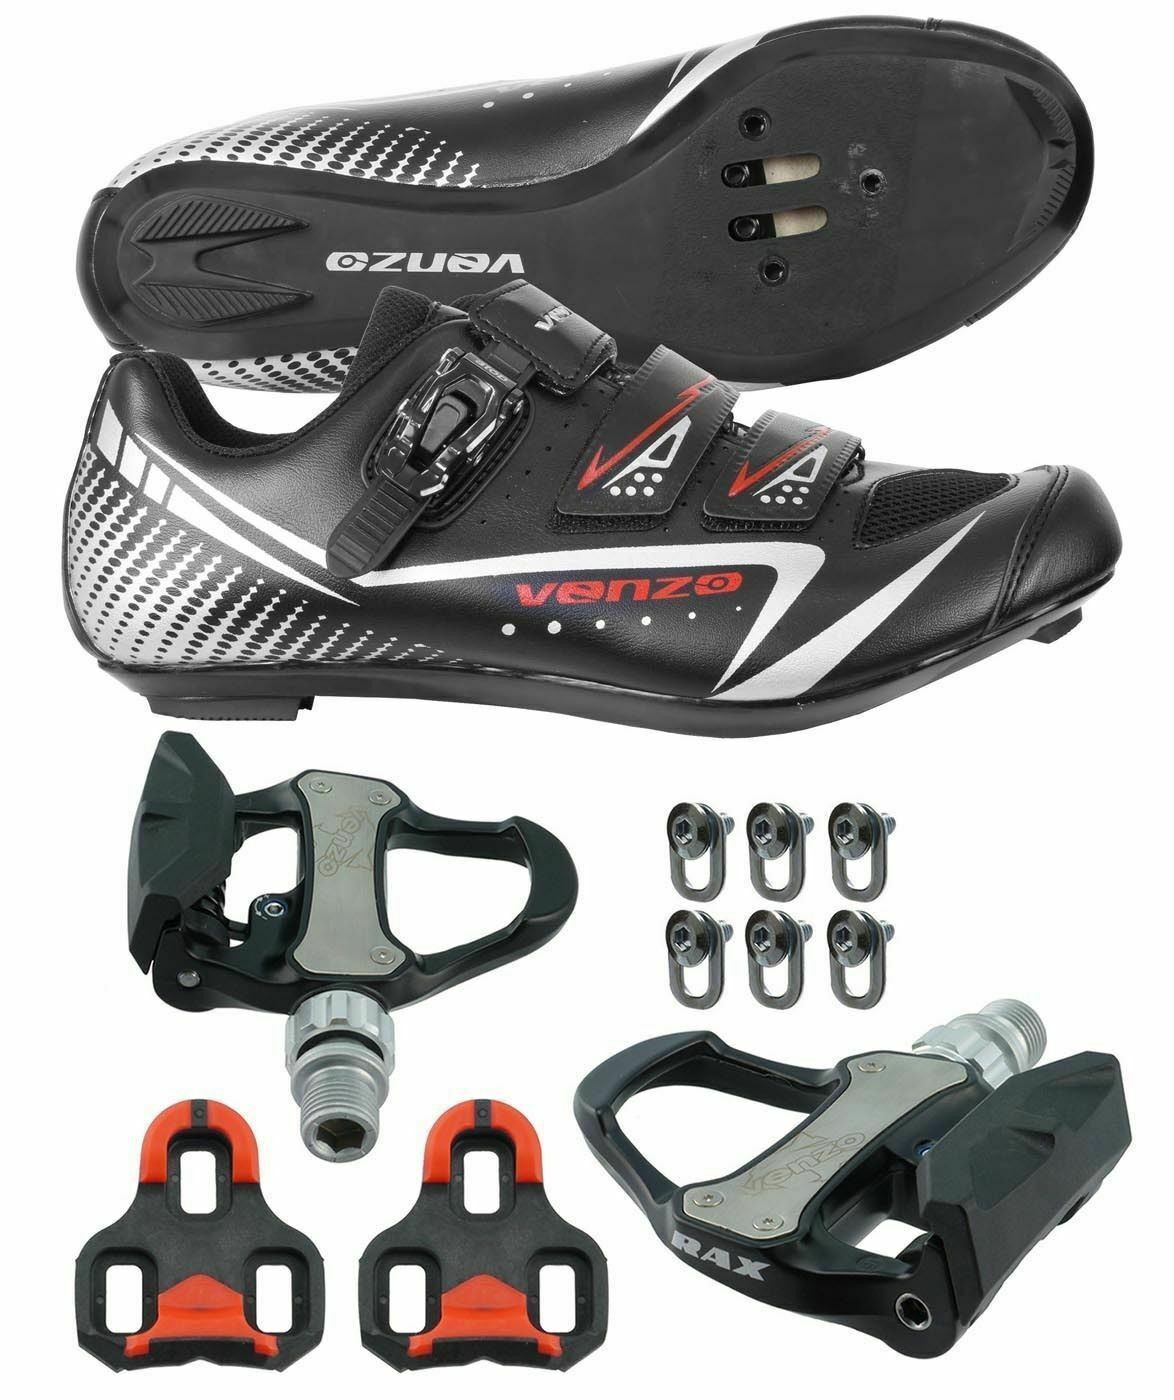 road cycling shoes and pedals combo